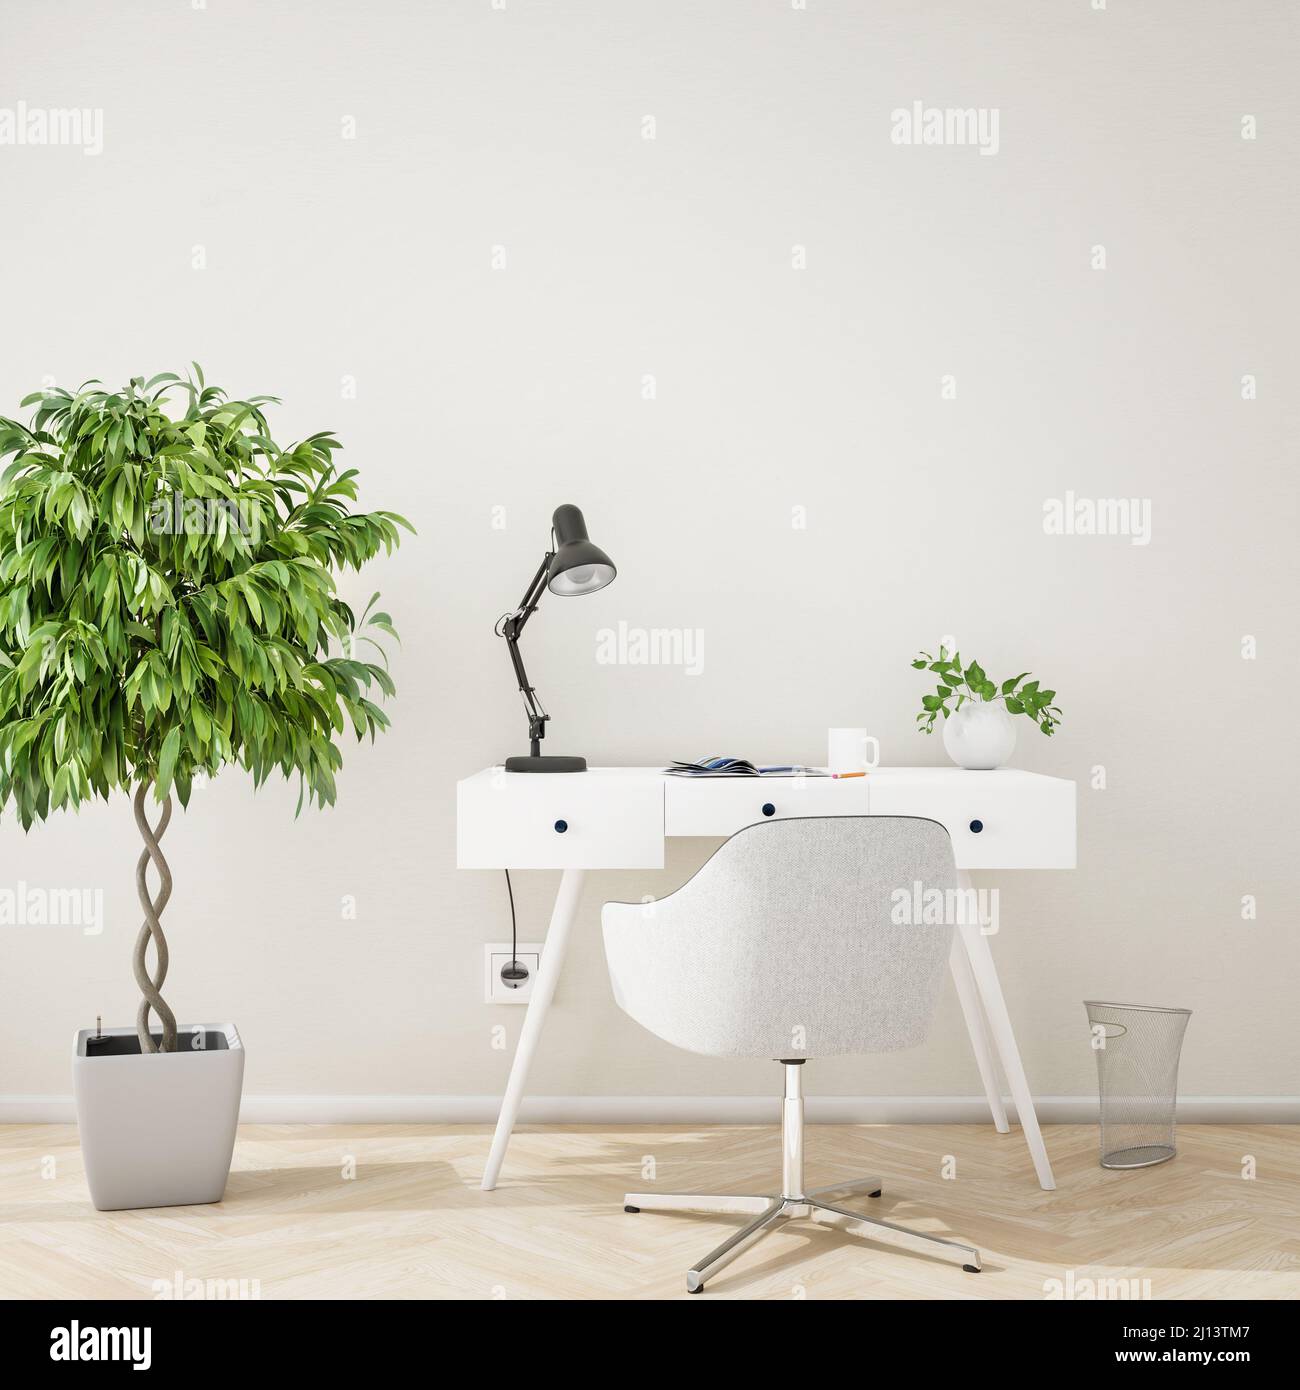 Mockup of a home office area with a beige structured wall, a writing desk, chair, wastebacket, desk lamp, coffee mug and a fig tree. Stock Photo